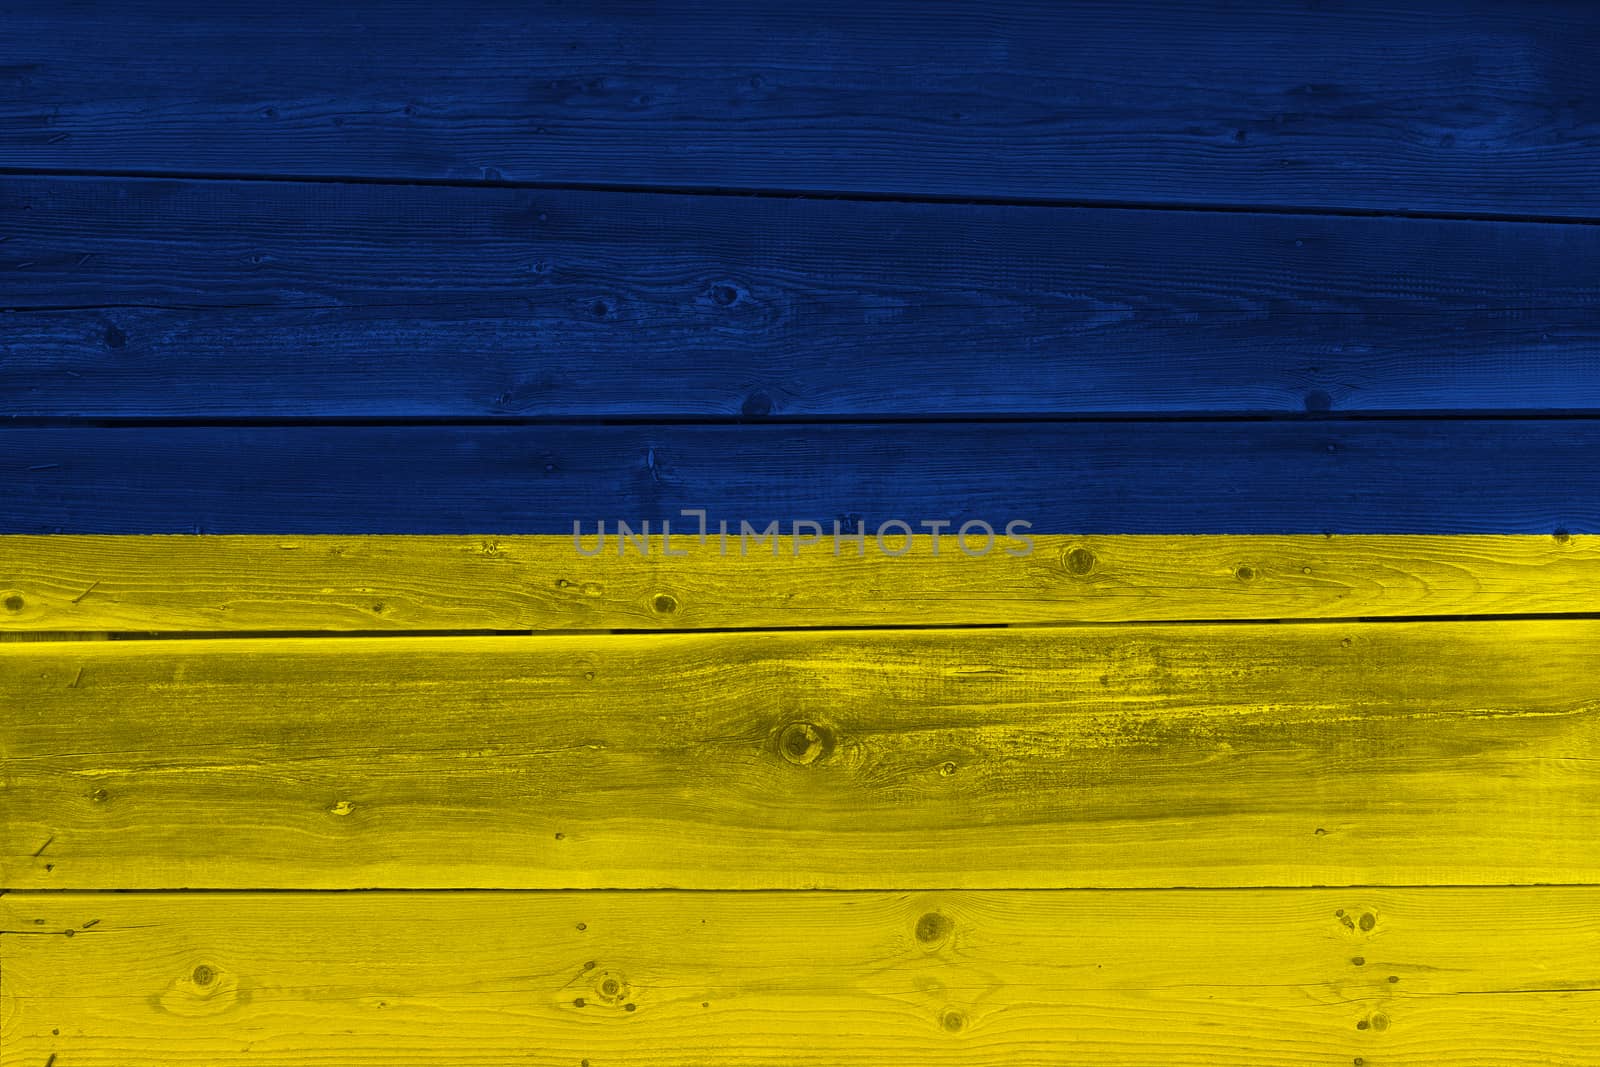 Ukraine flag painted on old wood plank by Visual-Content